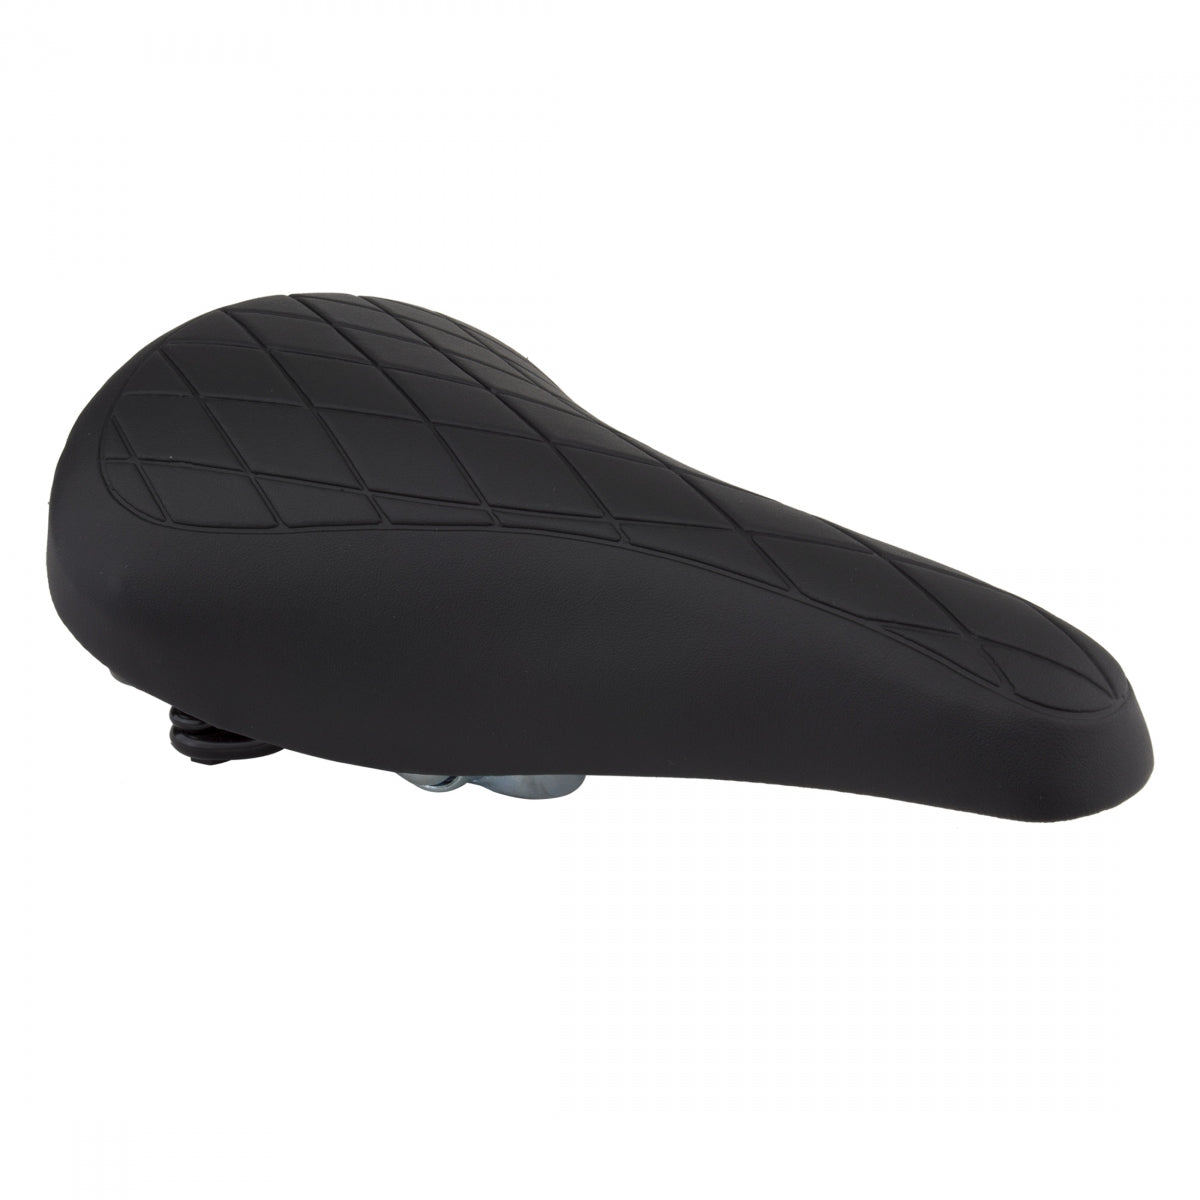 SUNLITE SADDLE SUNLT ROAD QUILTED w/COIL SPRINGS